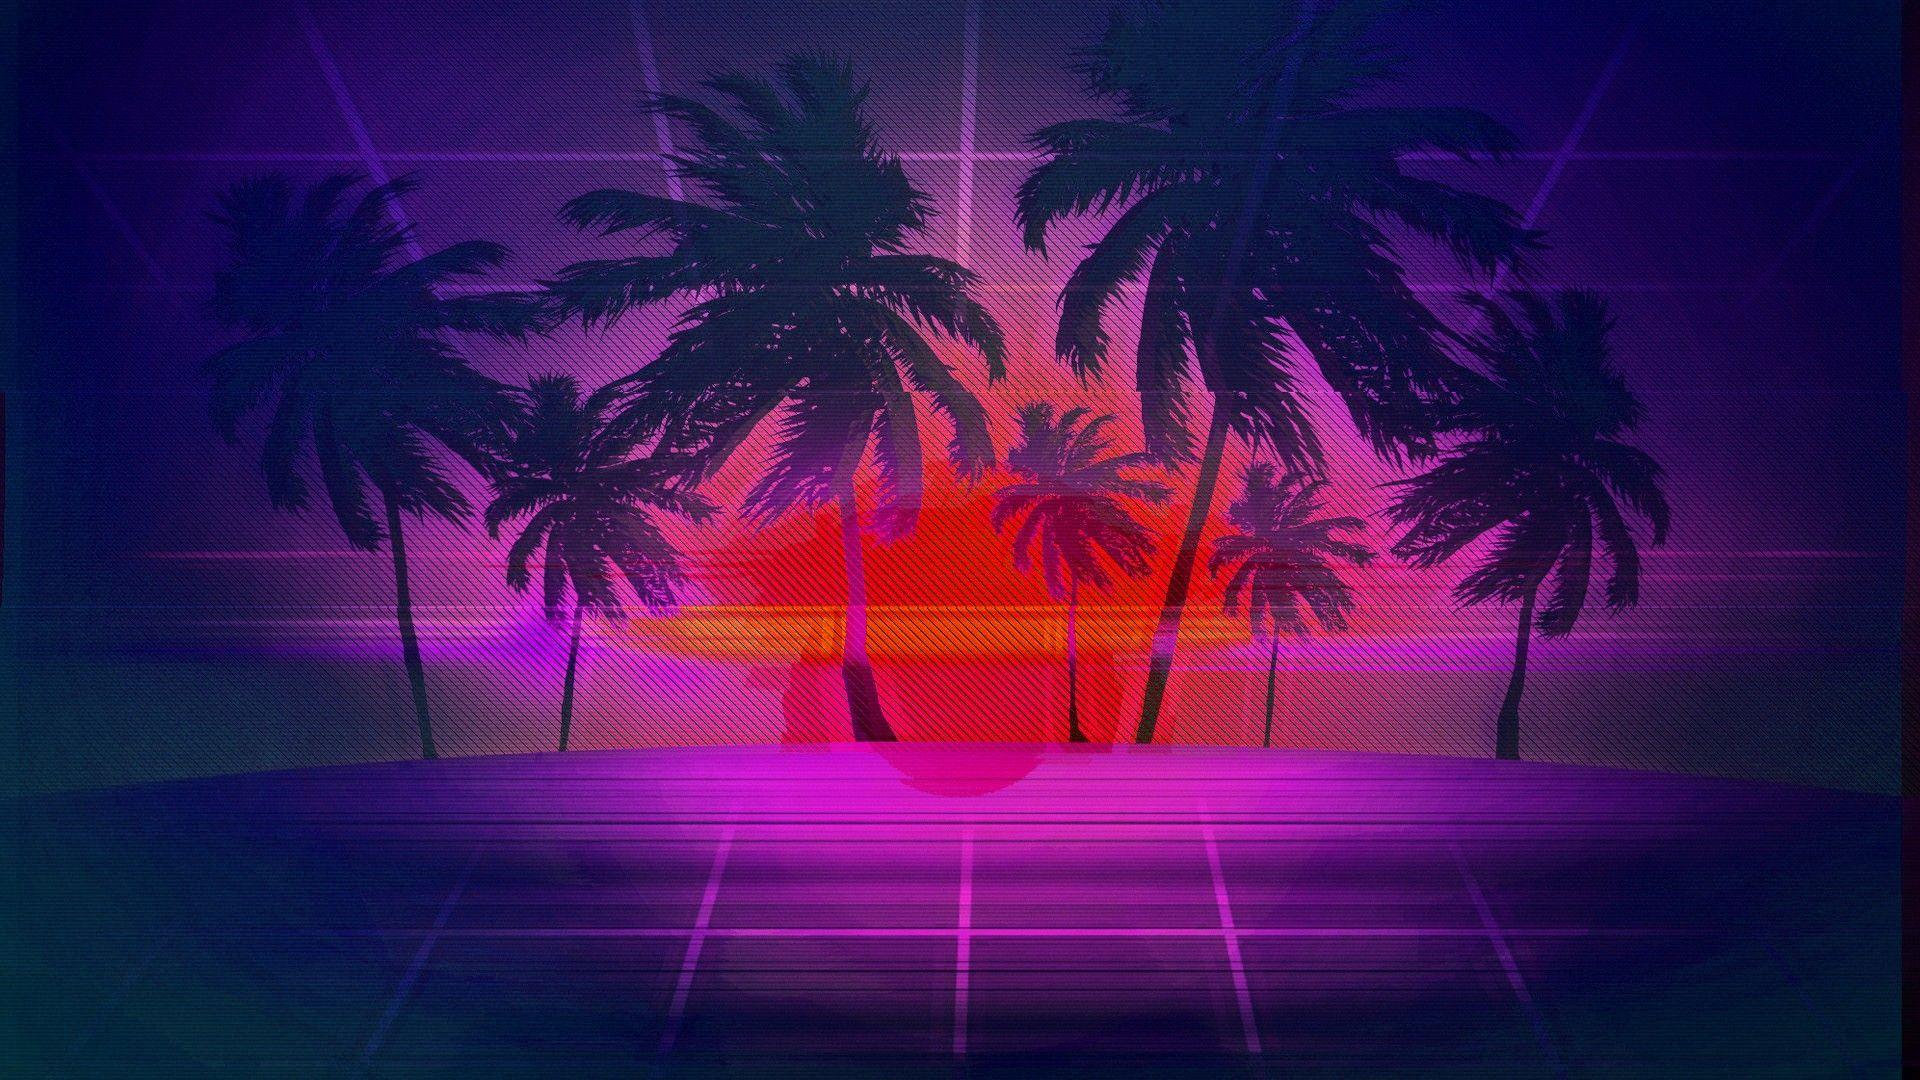 Painting Over Wallpaper Vaporwave Vhs Wallpaper Images, Photos, Reviews